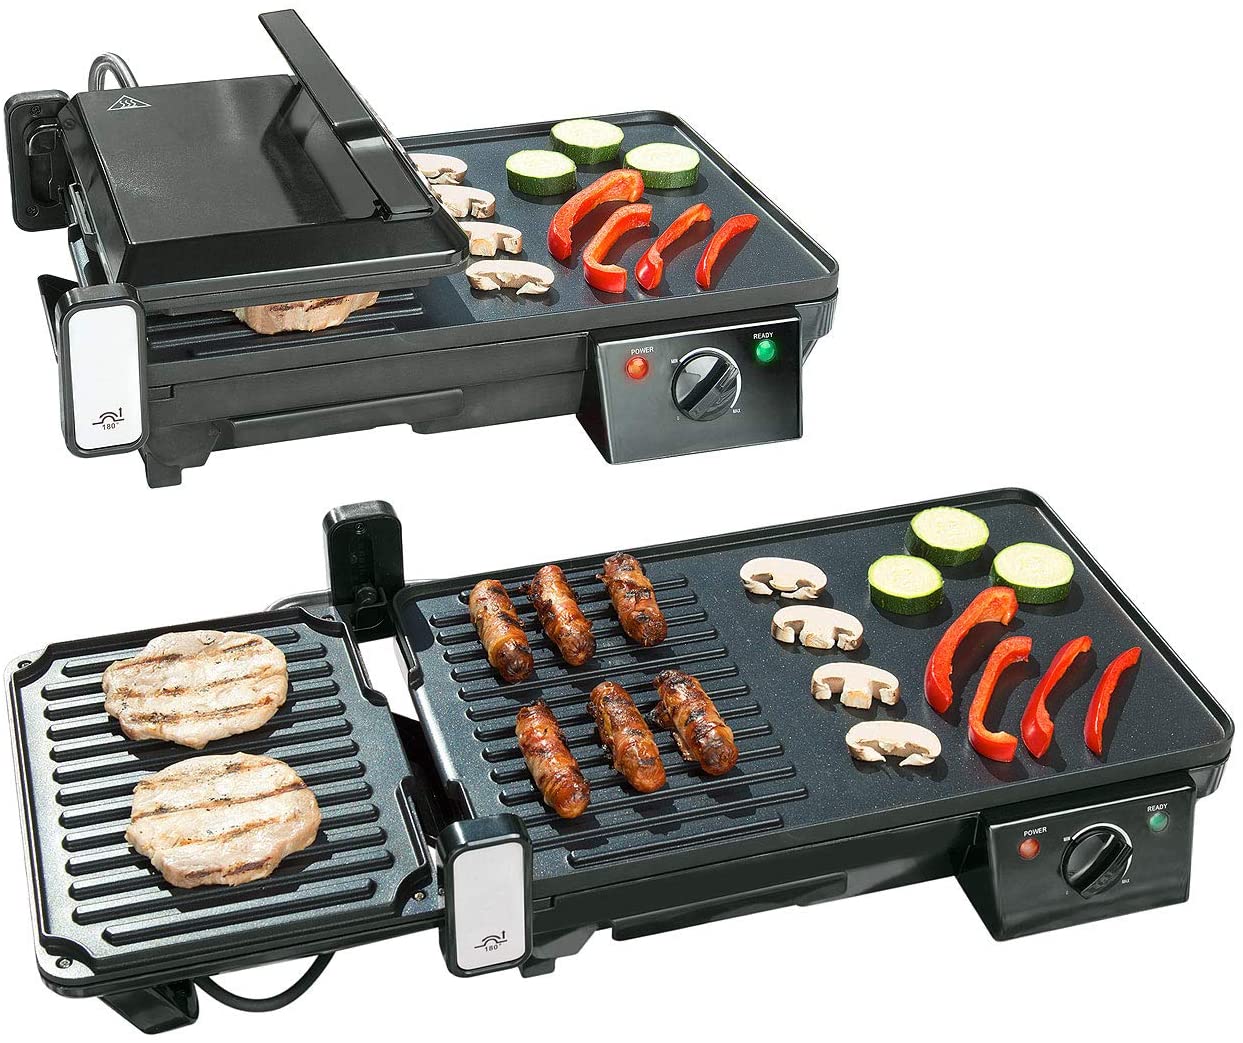 ROSENSTEIN & SOHNE Rosenstein & Söhne Grill: Electric 2-in-1 table grill with contact grill, grill plate, 2,000 watts (plate grill)